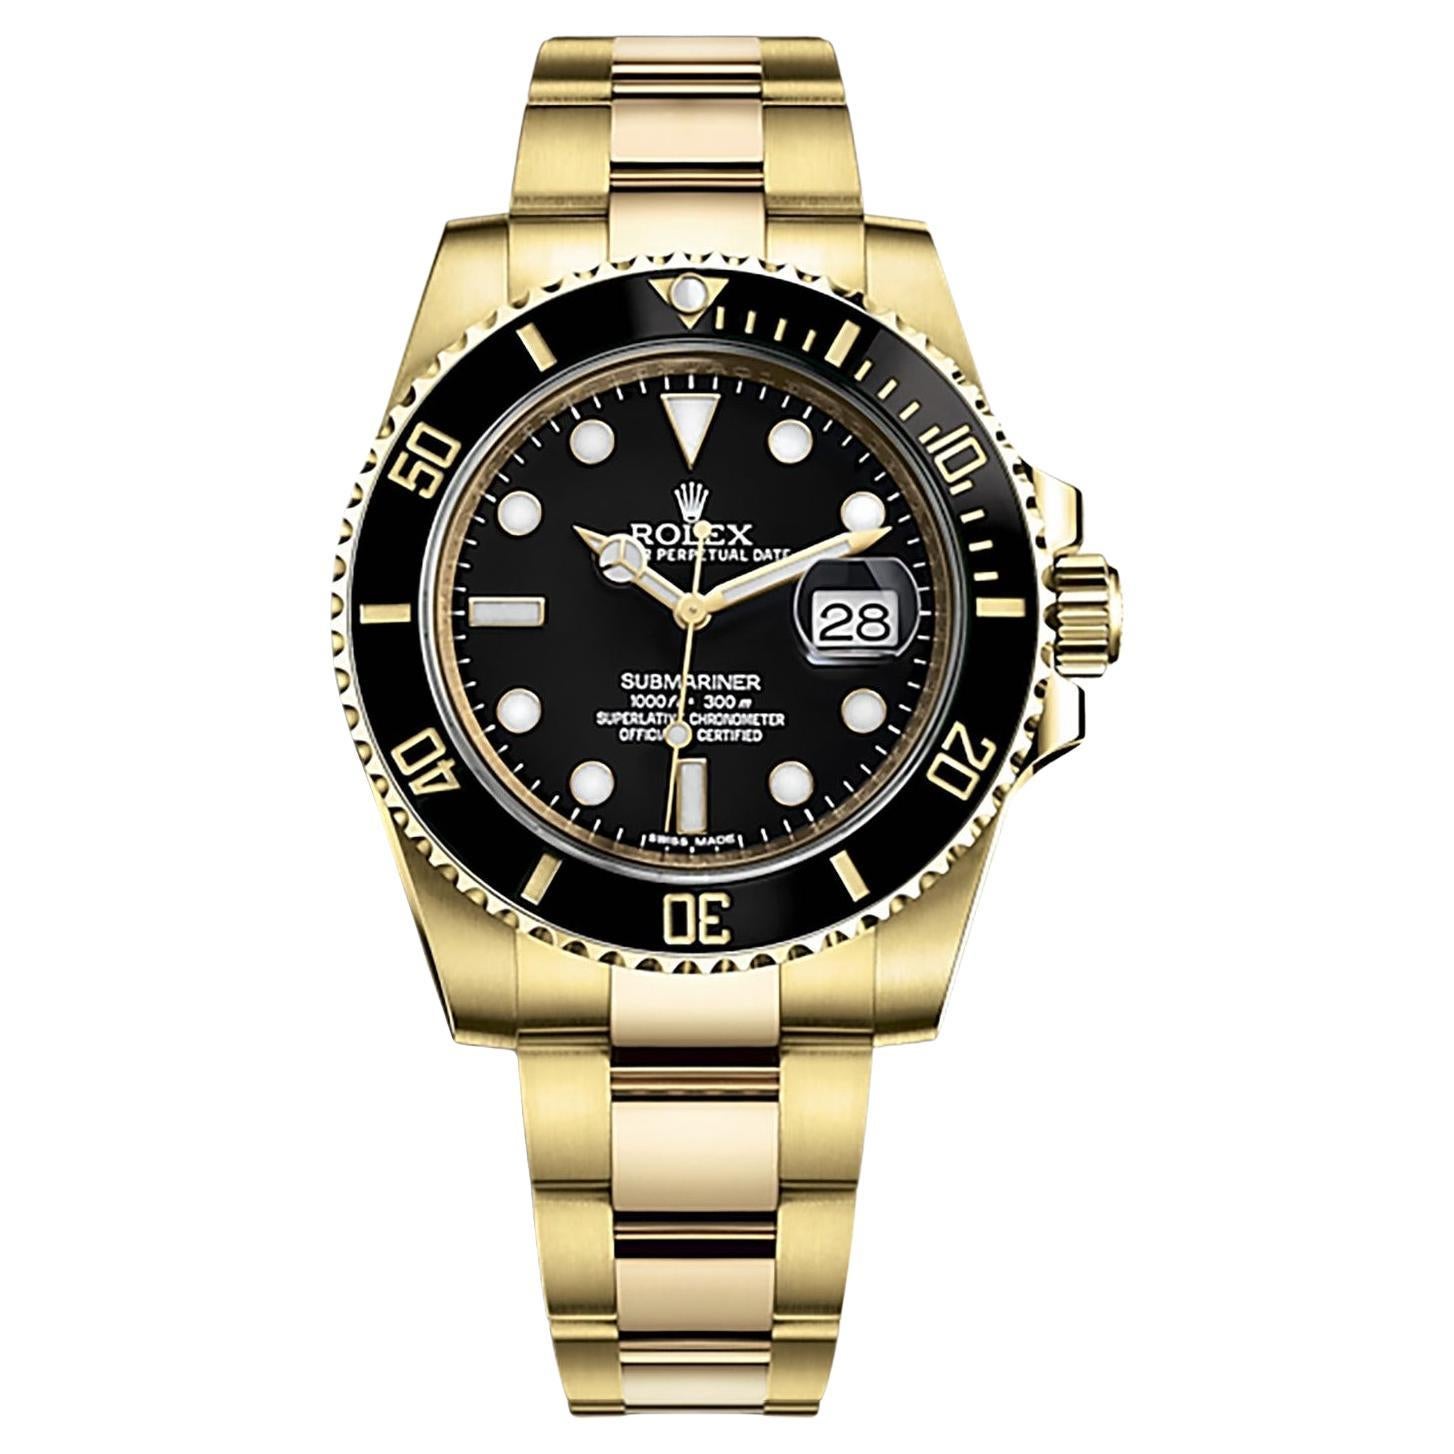 Rolex Submariner Date Automatic Yellow Gold Black Dial Men's Watch 116618LN For Sale